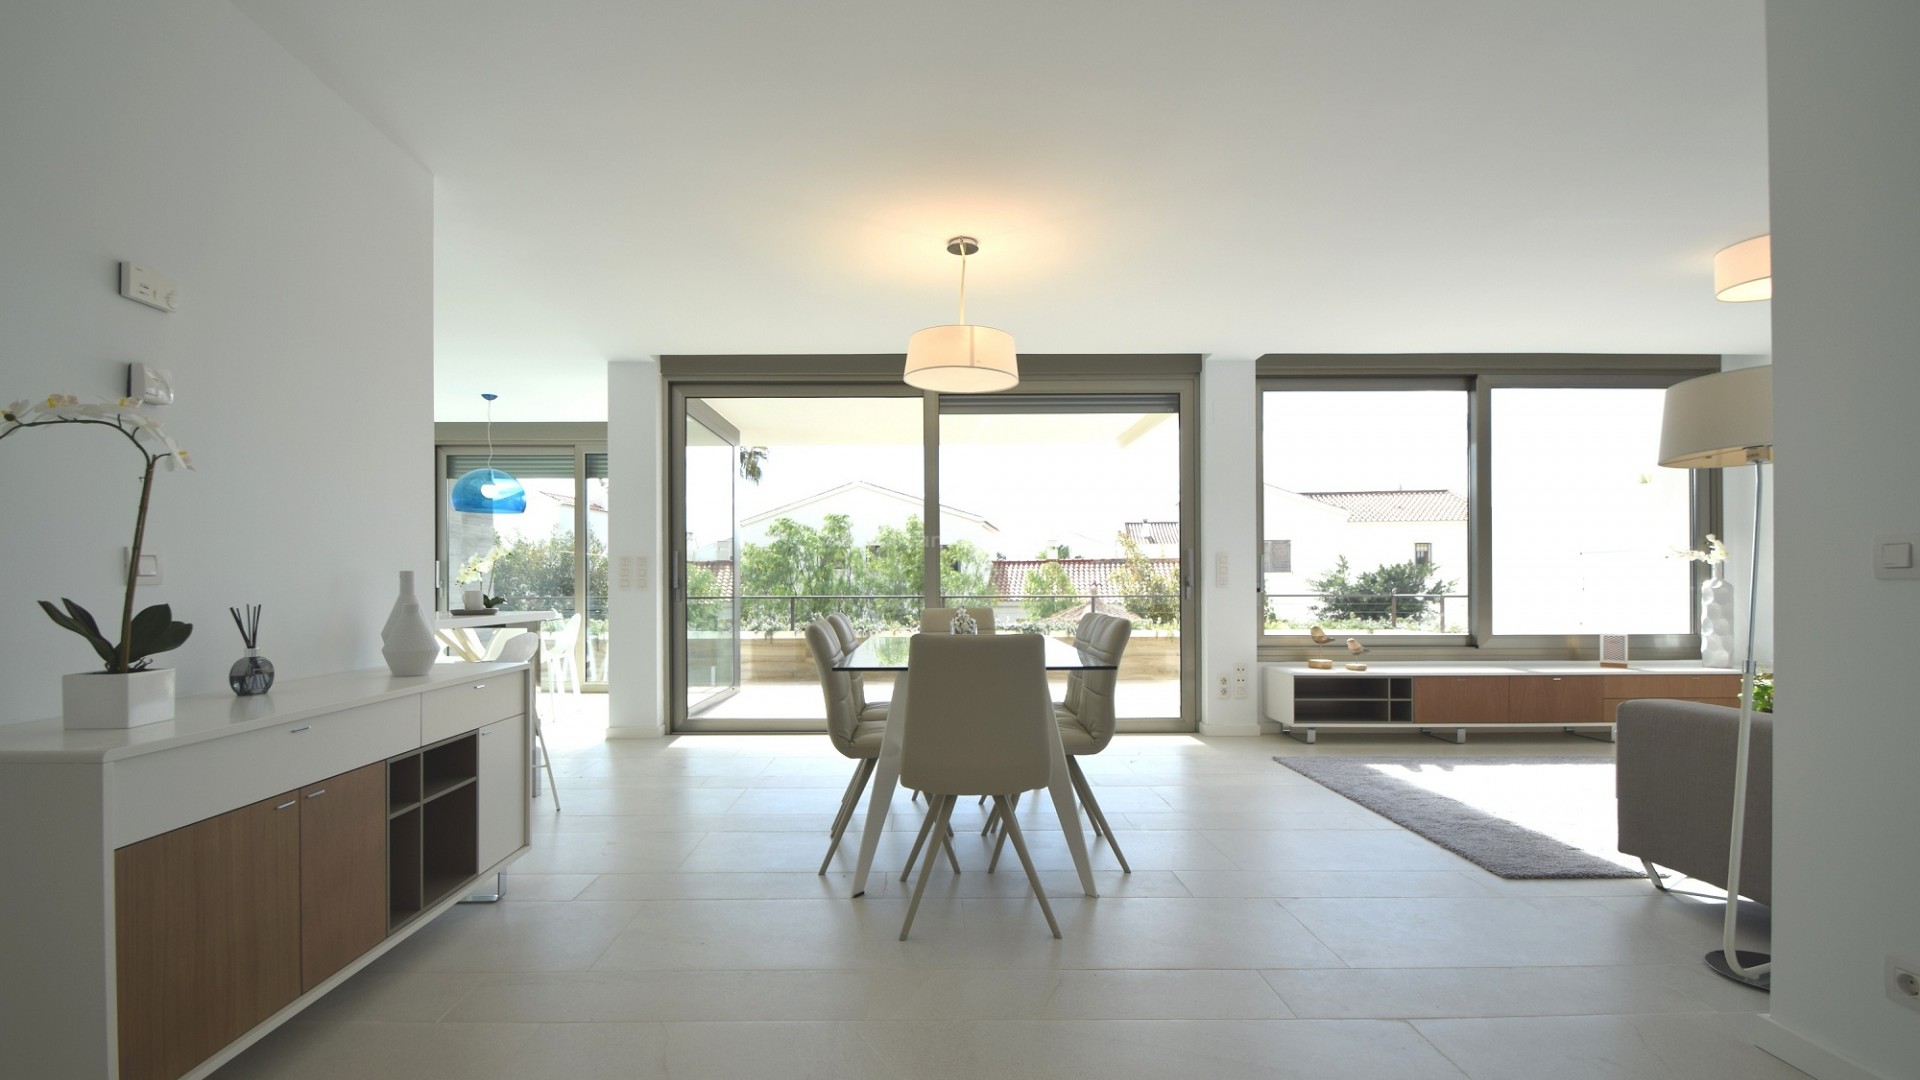 20 new modern apartments Santa Pola, 3 bedrooms, 2 bathrooms, large terrace with sea and ocean views, gym, 2 pools, play area in luxury residential area.